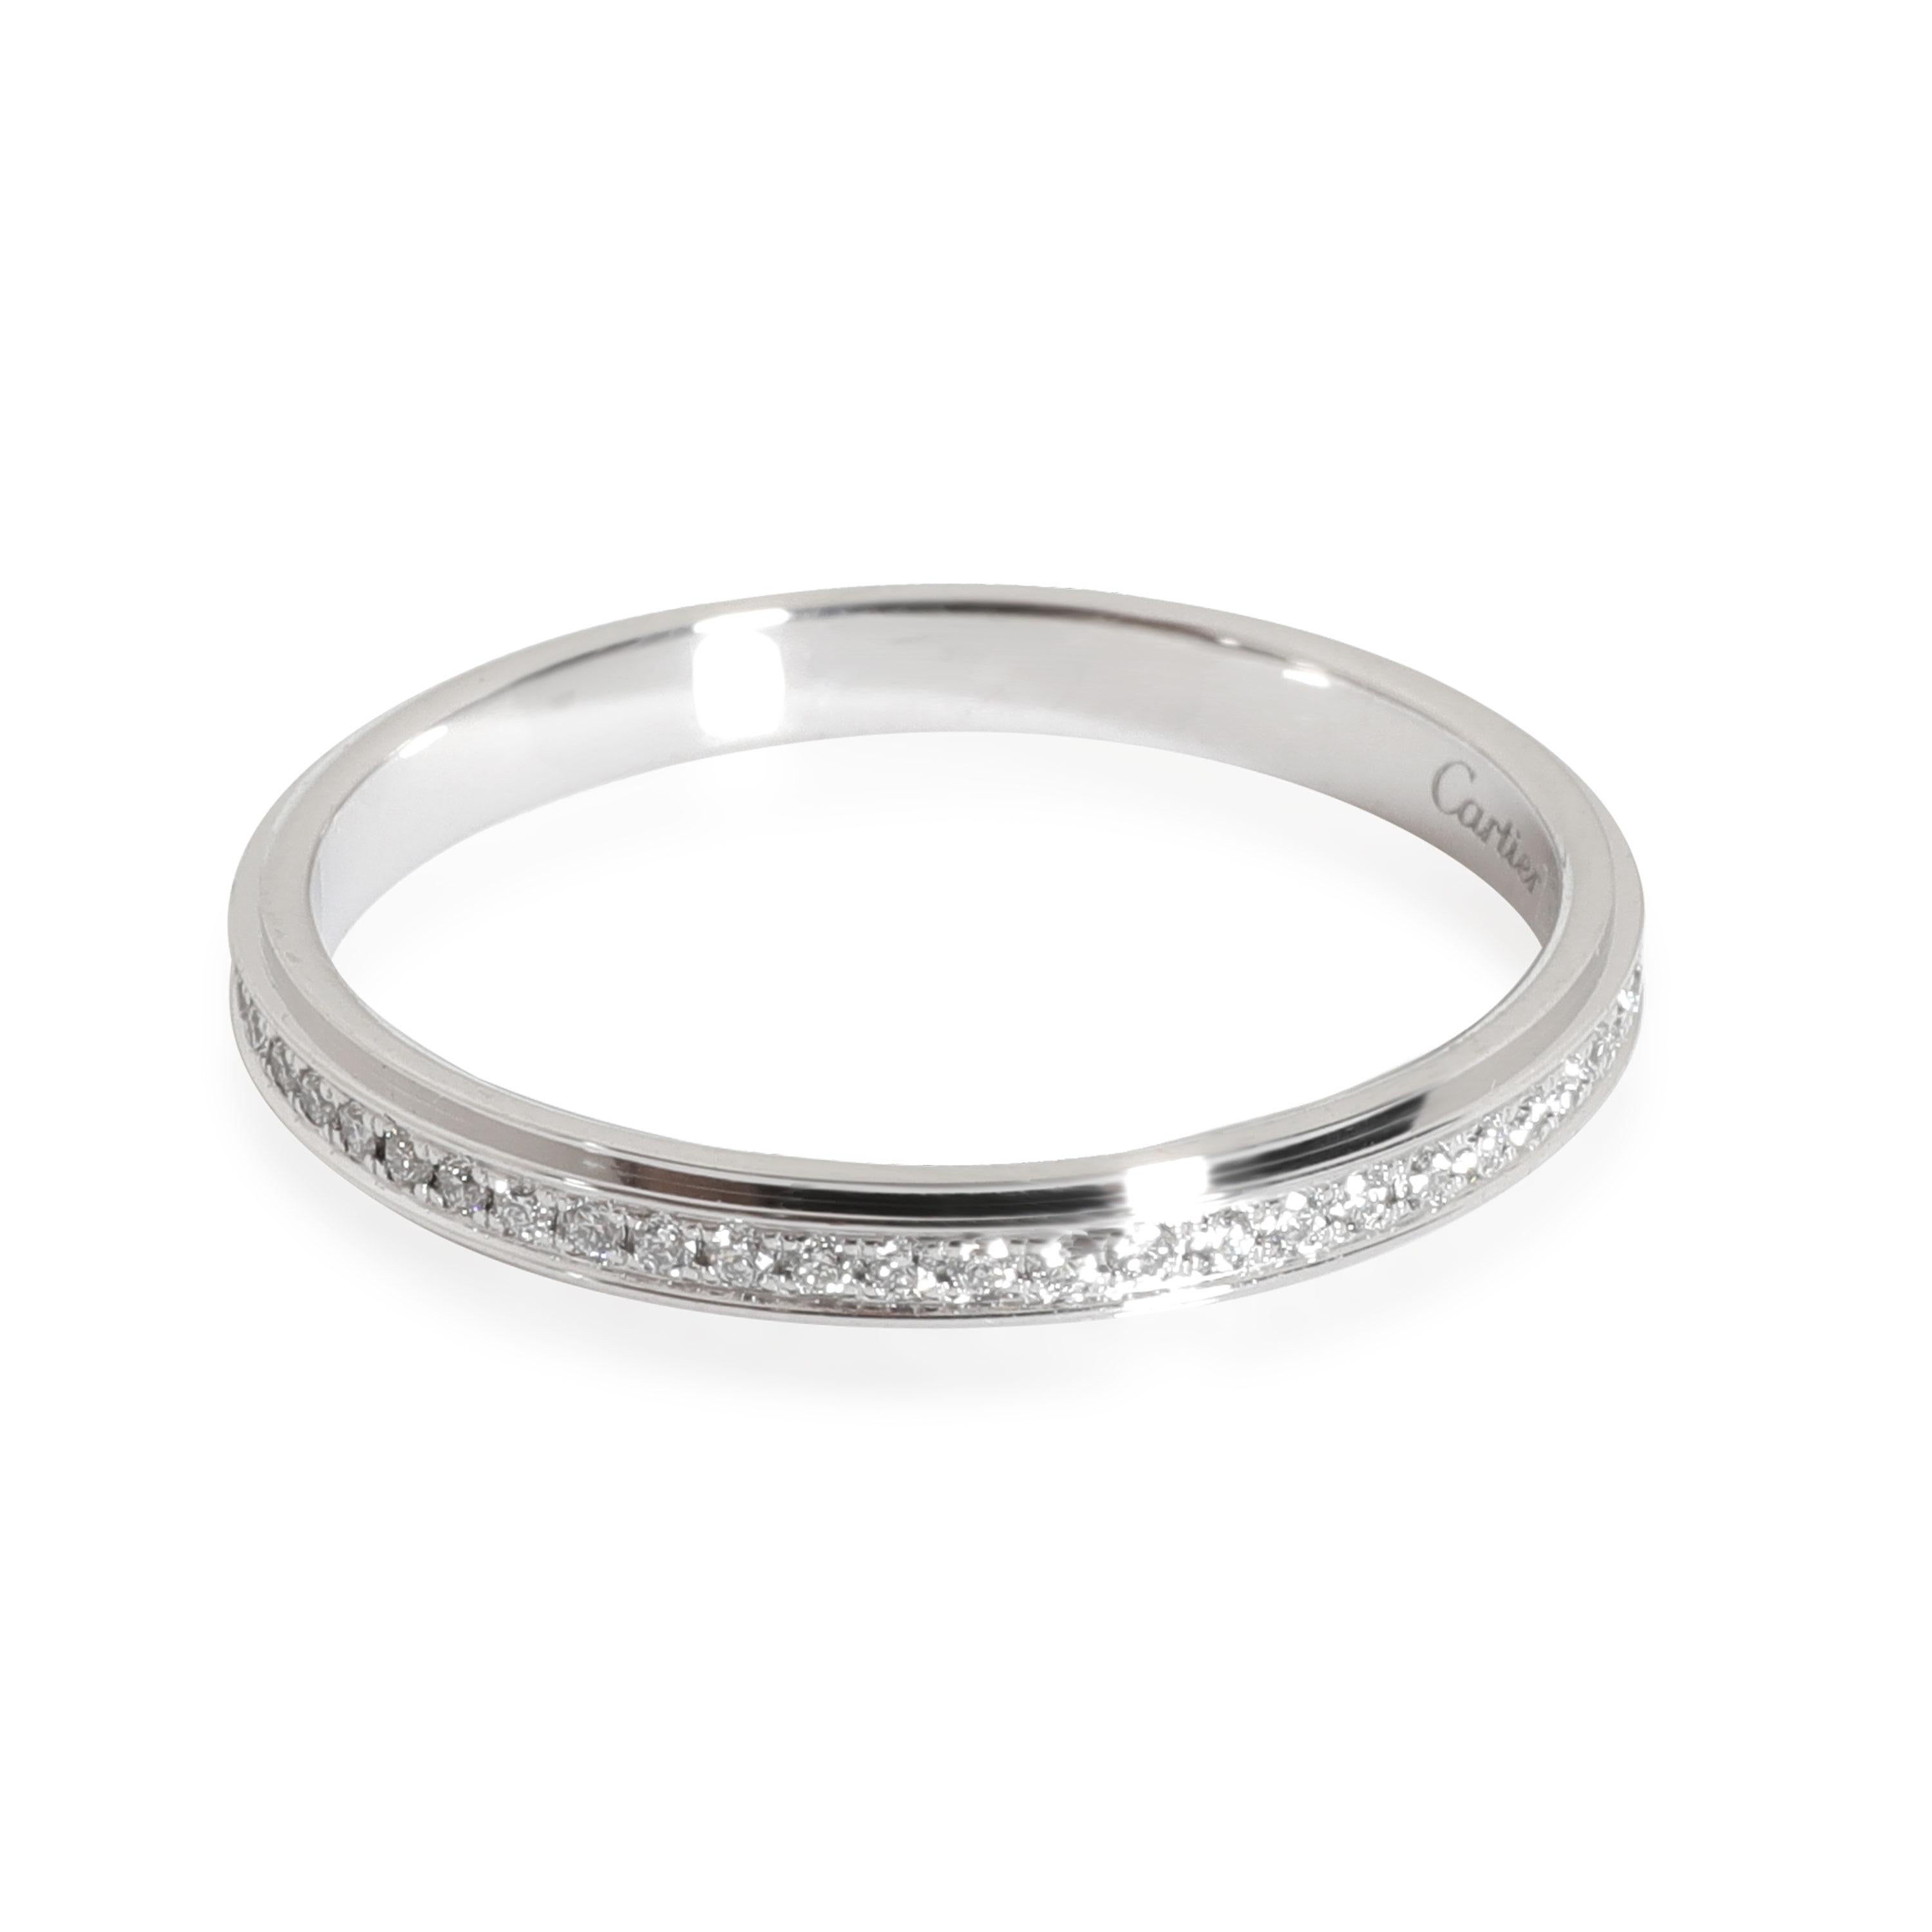 Cartier D'Amore Diamond Wedding Band in Platinum 0.15 CTW

PRIMARY DETAILS
SKU: 116129
Listing Title: Cartier D'Amore Diamond Wedding Band in Platinum 0.15 CTW
Condition Description: Retails for 3500 USD. In excellent condition and recently